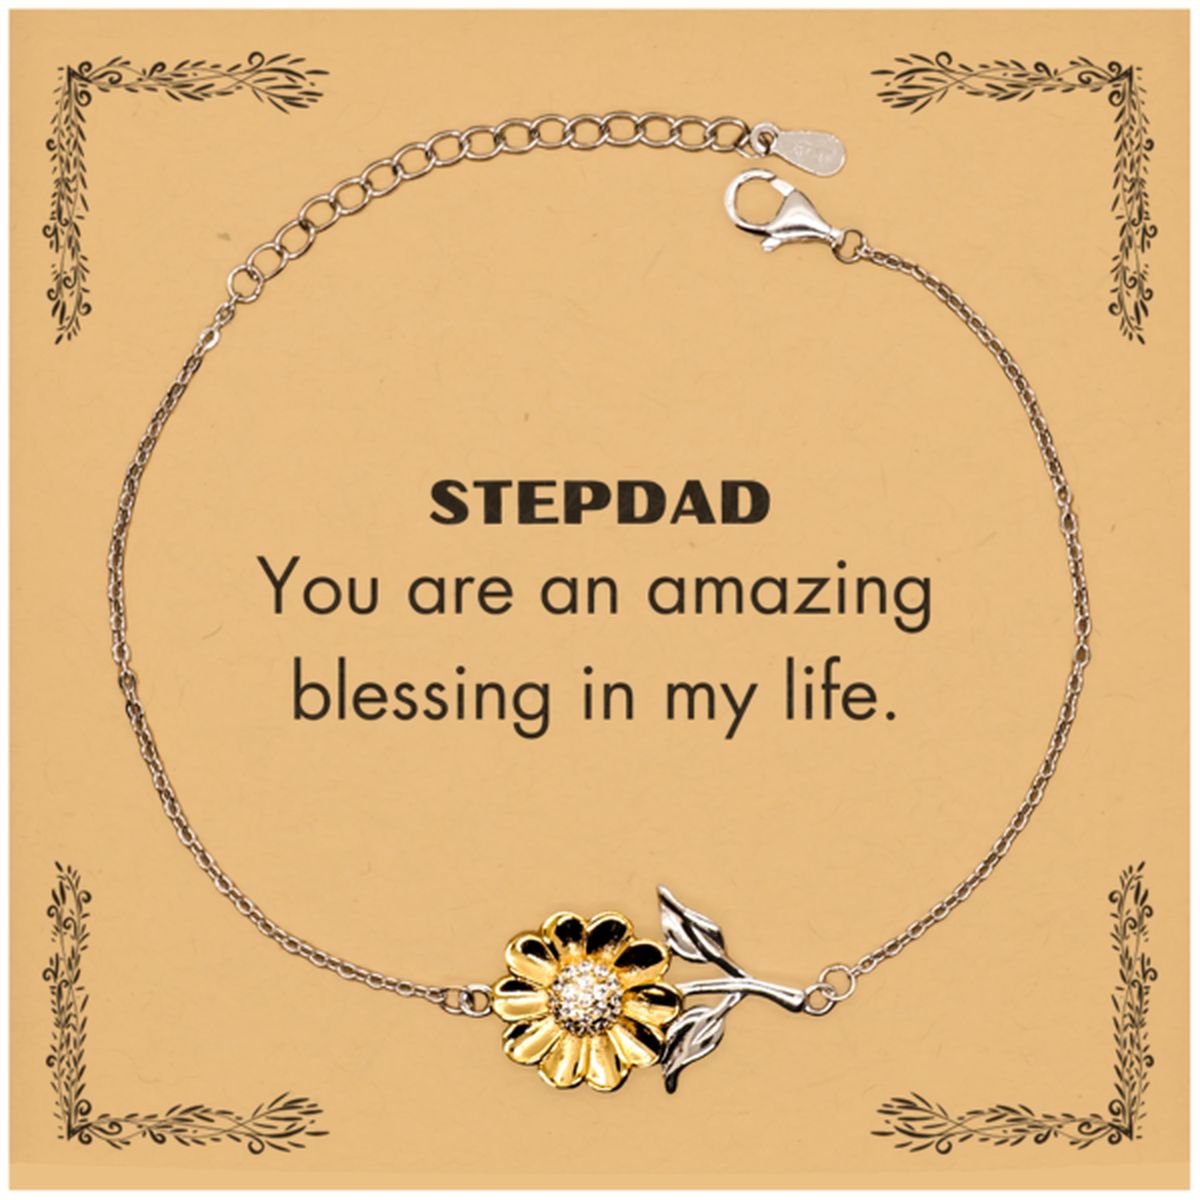 Stepdad Sunflower Bracelet, You are an amazing blessing in my life, Thank You Gifts For Stepdad, Inspirational Birthday Christmas Unique Gifts For Stepdad